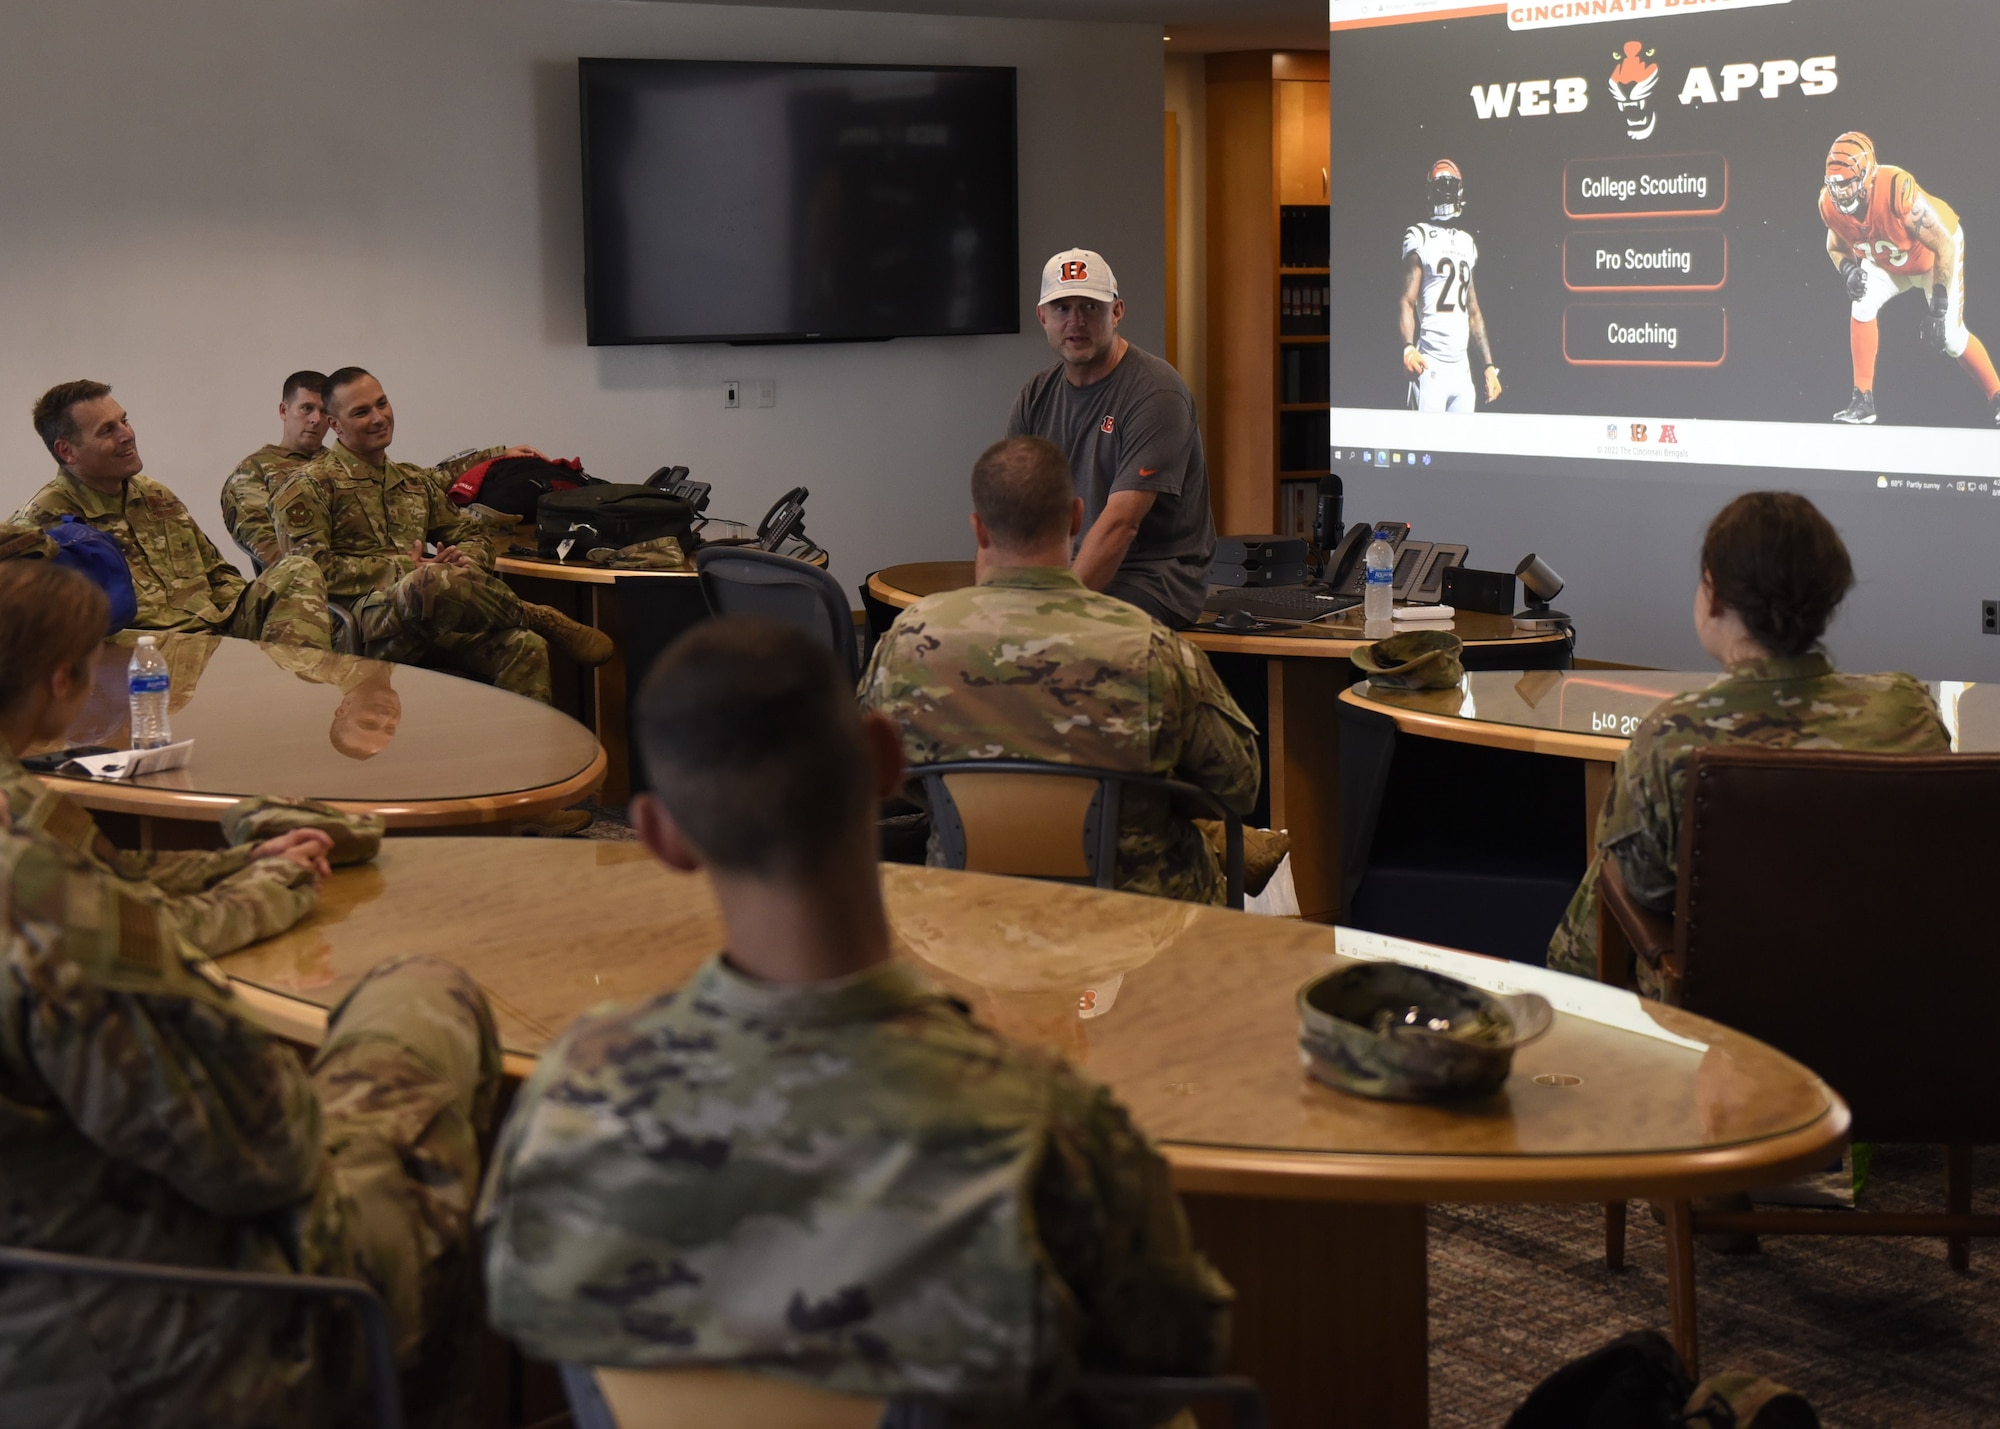 Duke Tobin (top center), Cincinnati Bengals Director of Player Personnel, briefs 70th Intelligence, Surveillance, & Reconnaissance Wing senior leaders during a Senior Leadership Summit Aug. 8, 2022, at Wright-Patterson Air Force Base, Ohio. Tobin discussed how an organization like the Cincinnati Bengals builds a successful team by using analytics on performance and character traits to choose the right players.